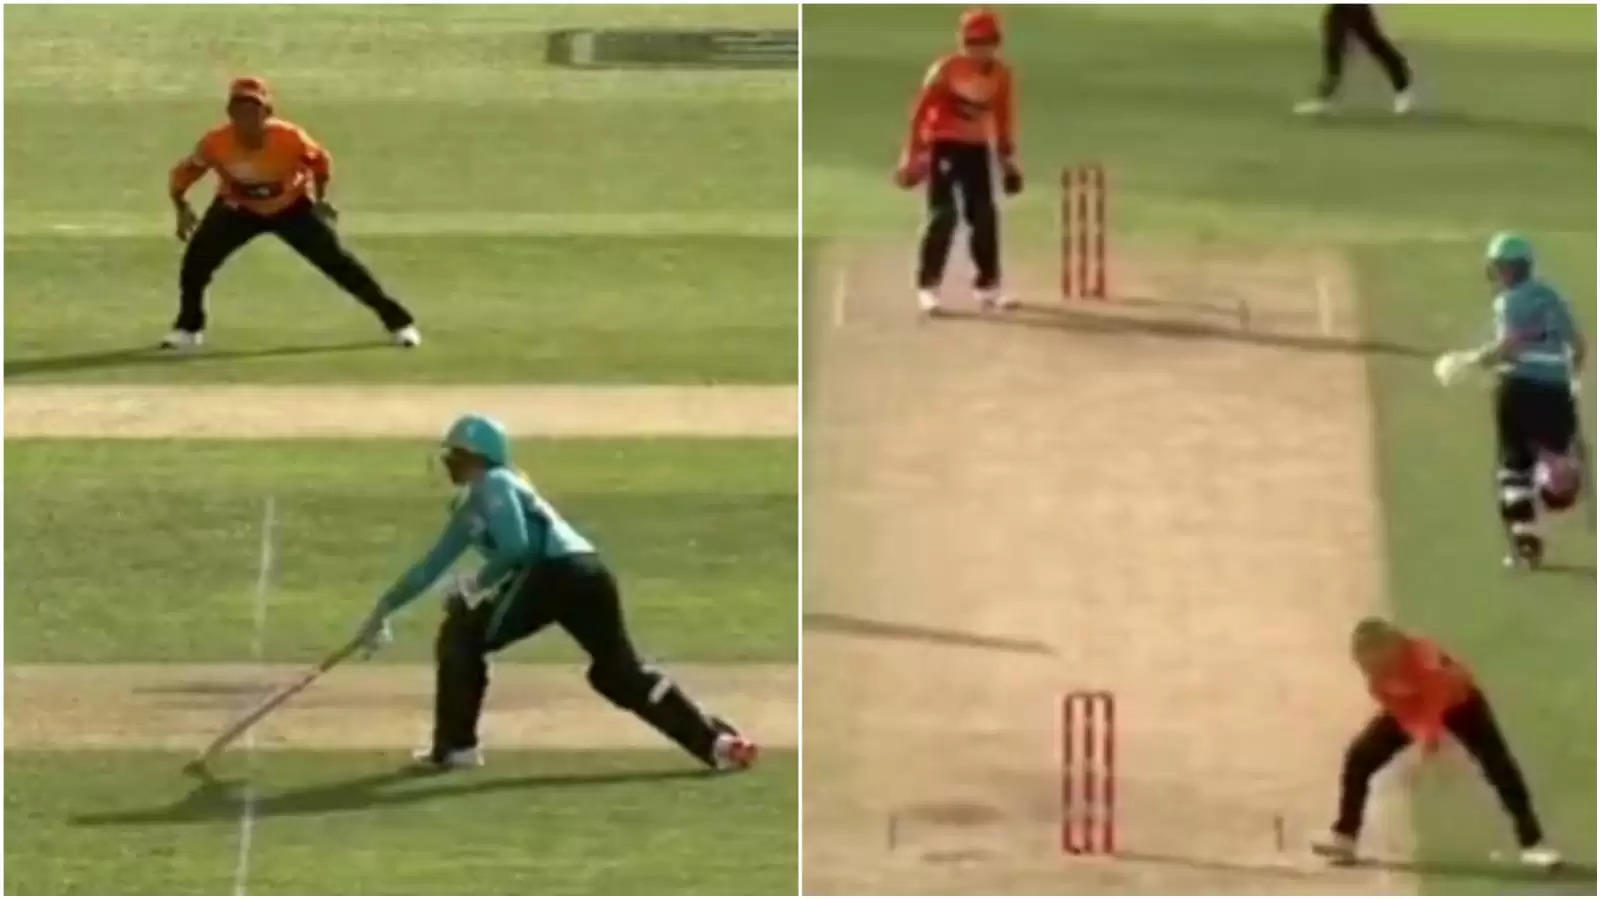 WATCH: Complete brainfade from lazy batter, and then bowler, forces Super Over in WBBL